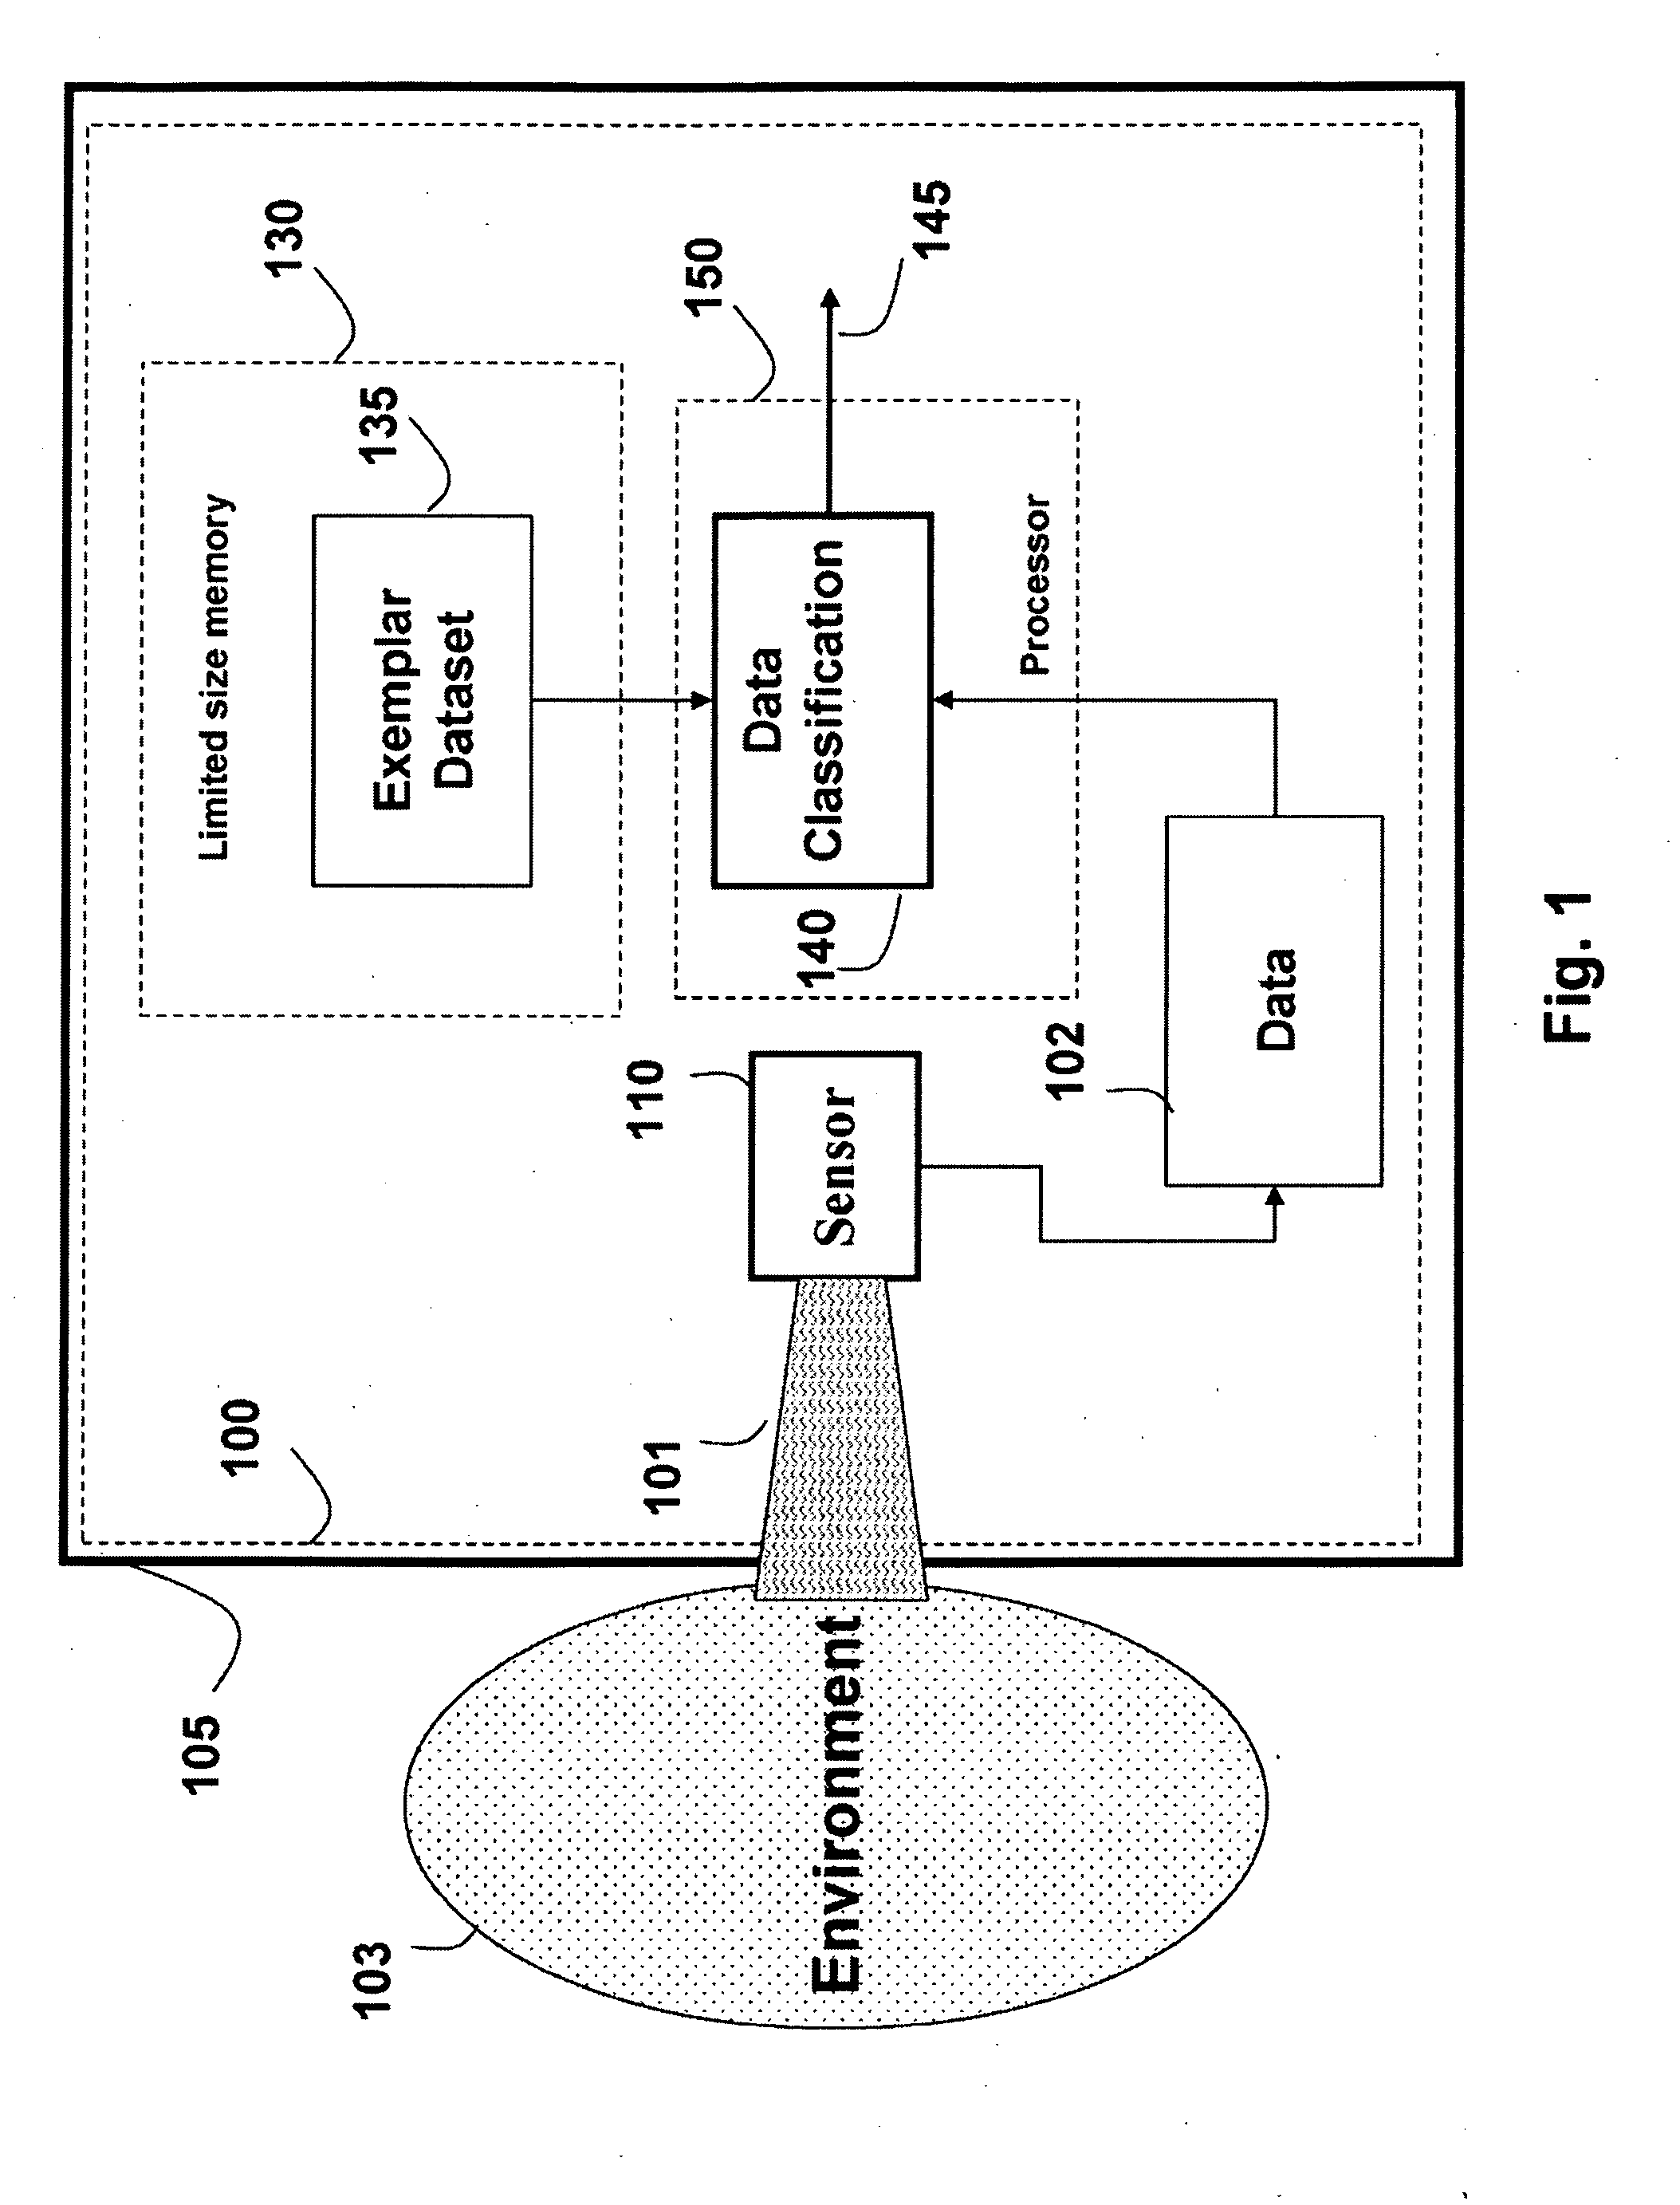 Method and System for Classifying Data in System with Limited Memory